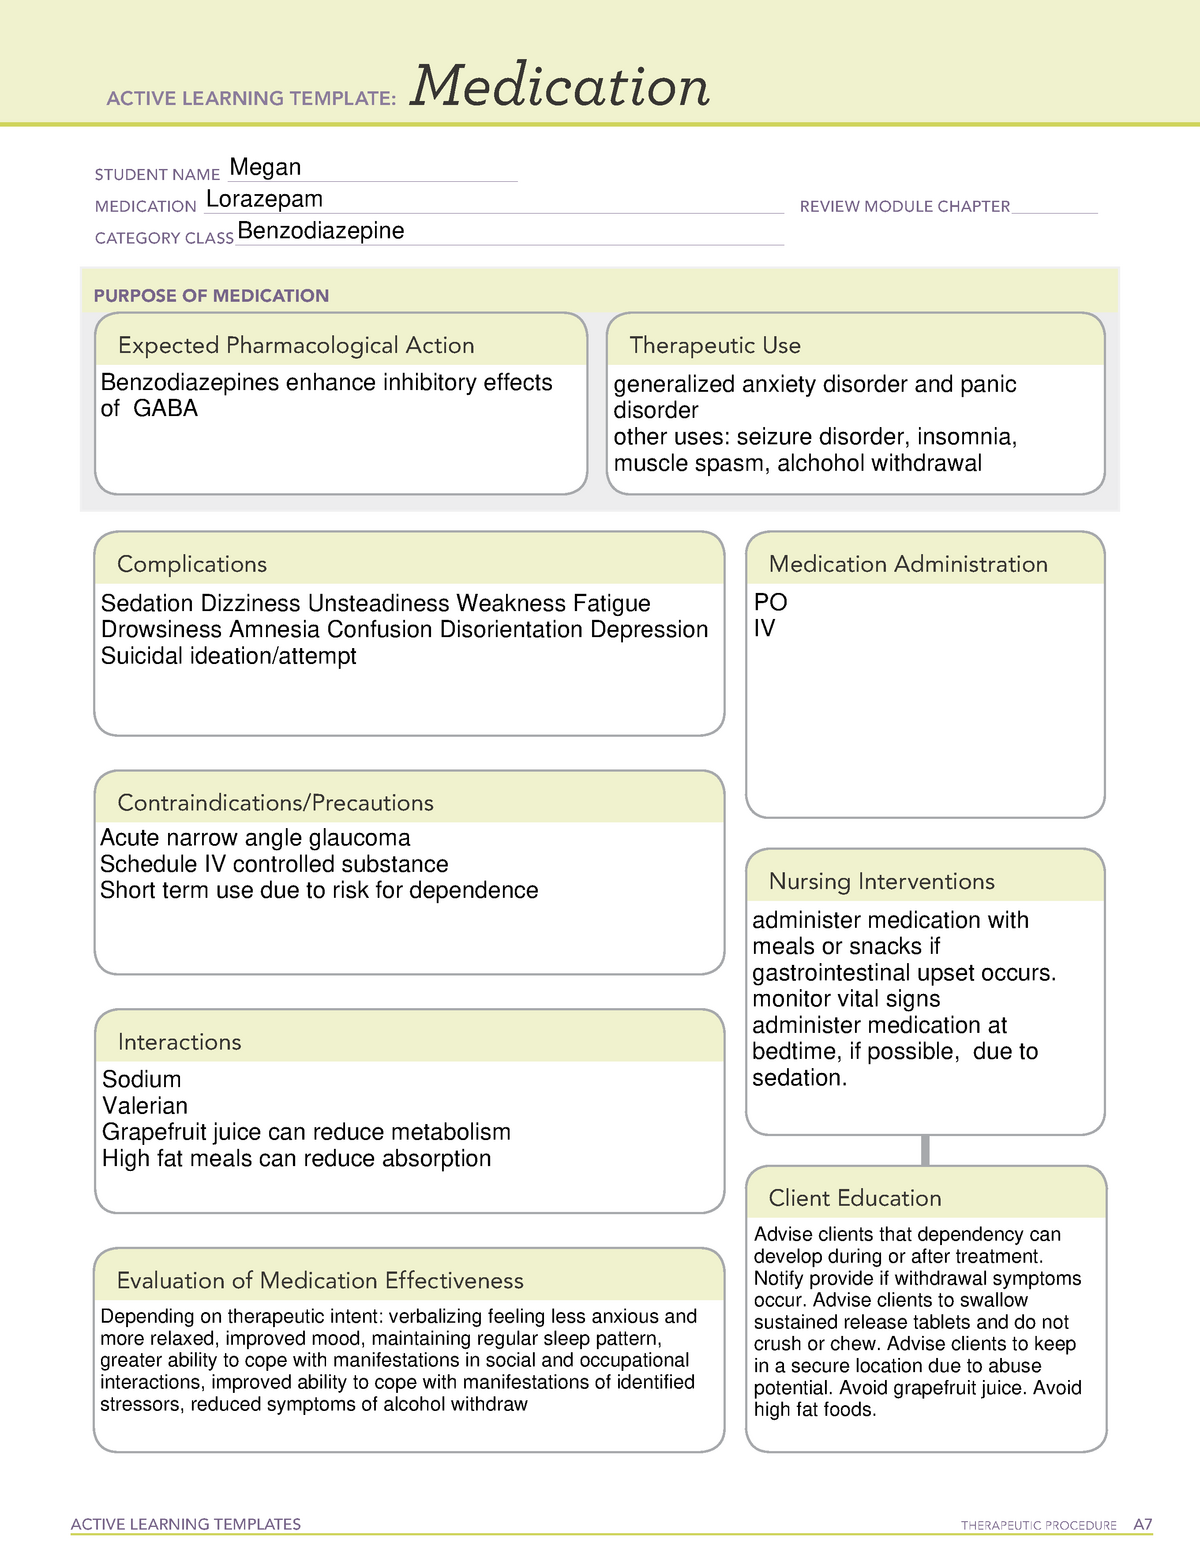 Active Learning Template medication Lorazepam ACTIVE LEARNING